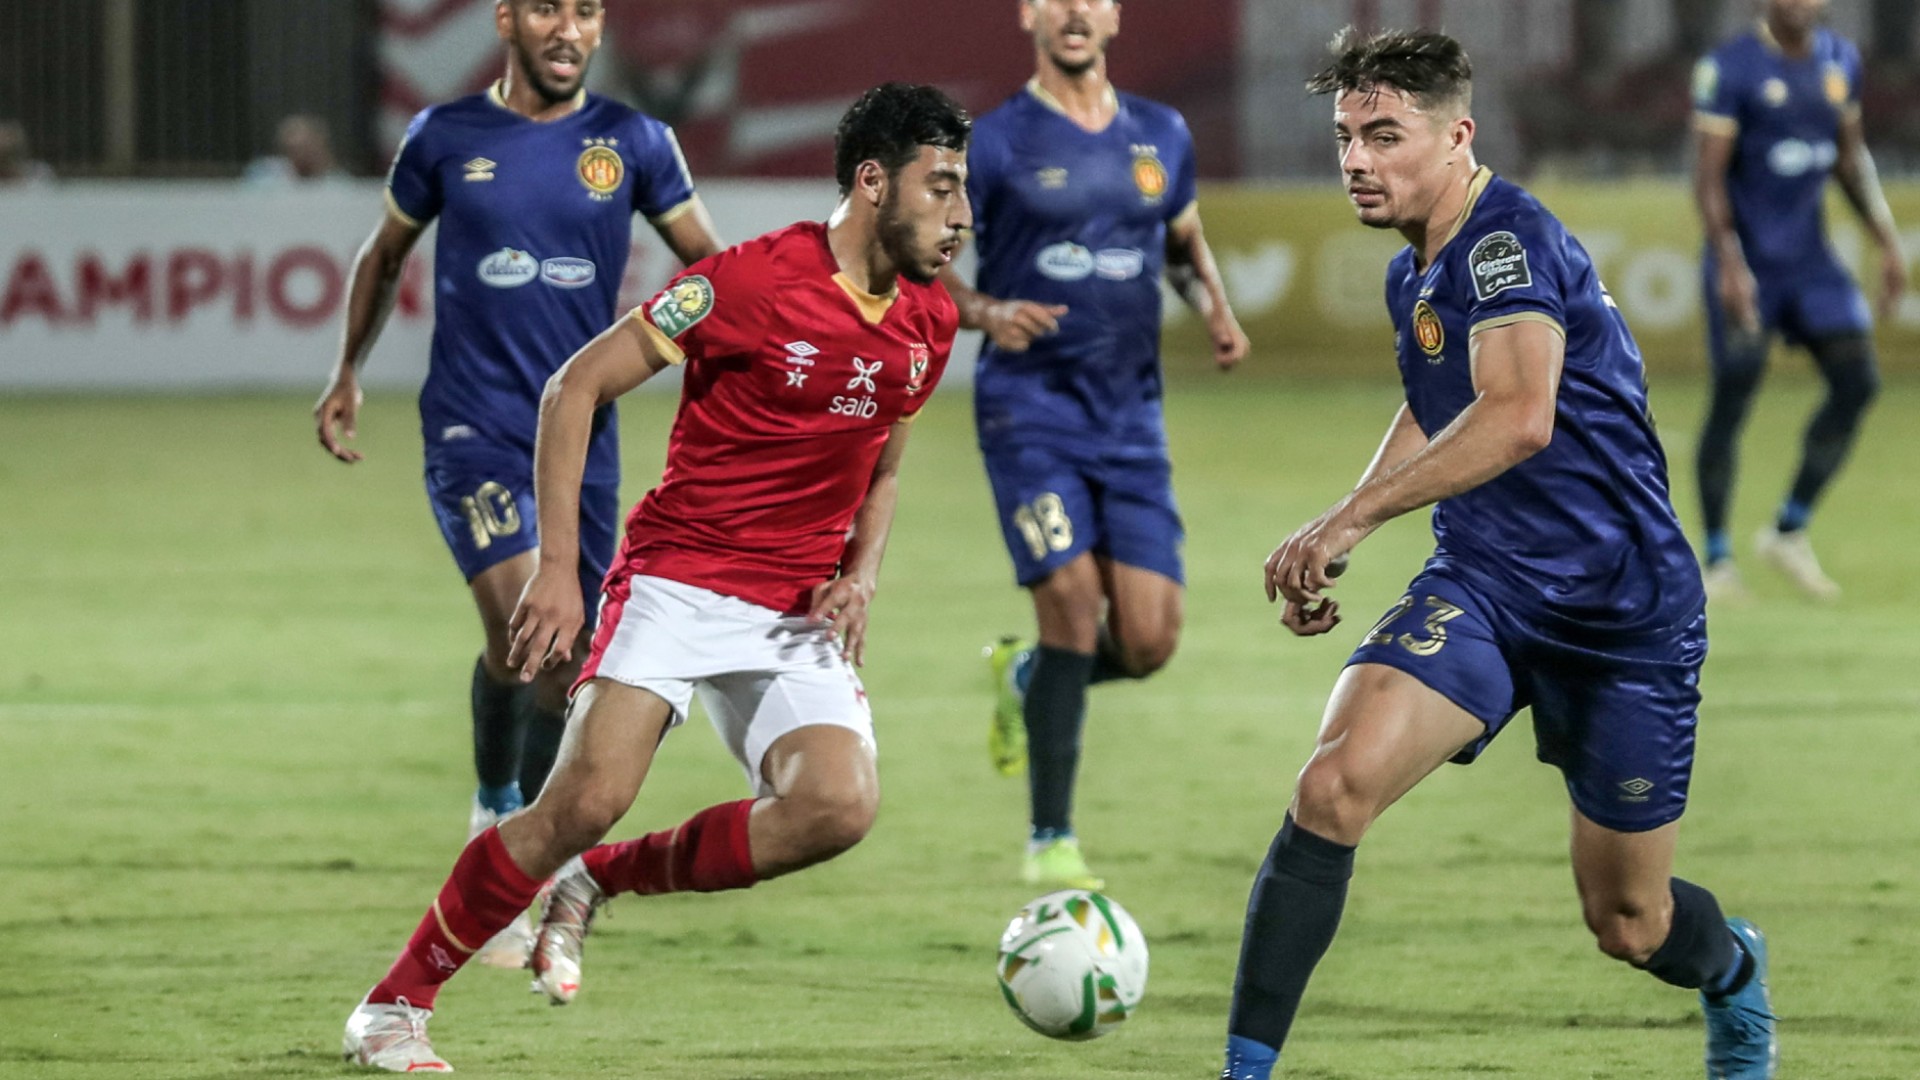 Caf Champions League: Al Ahly 3-0 Esperance (4-0 agg) – Red Devils qualify for final